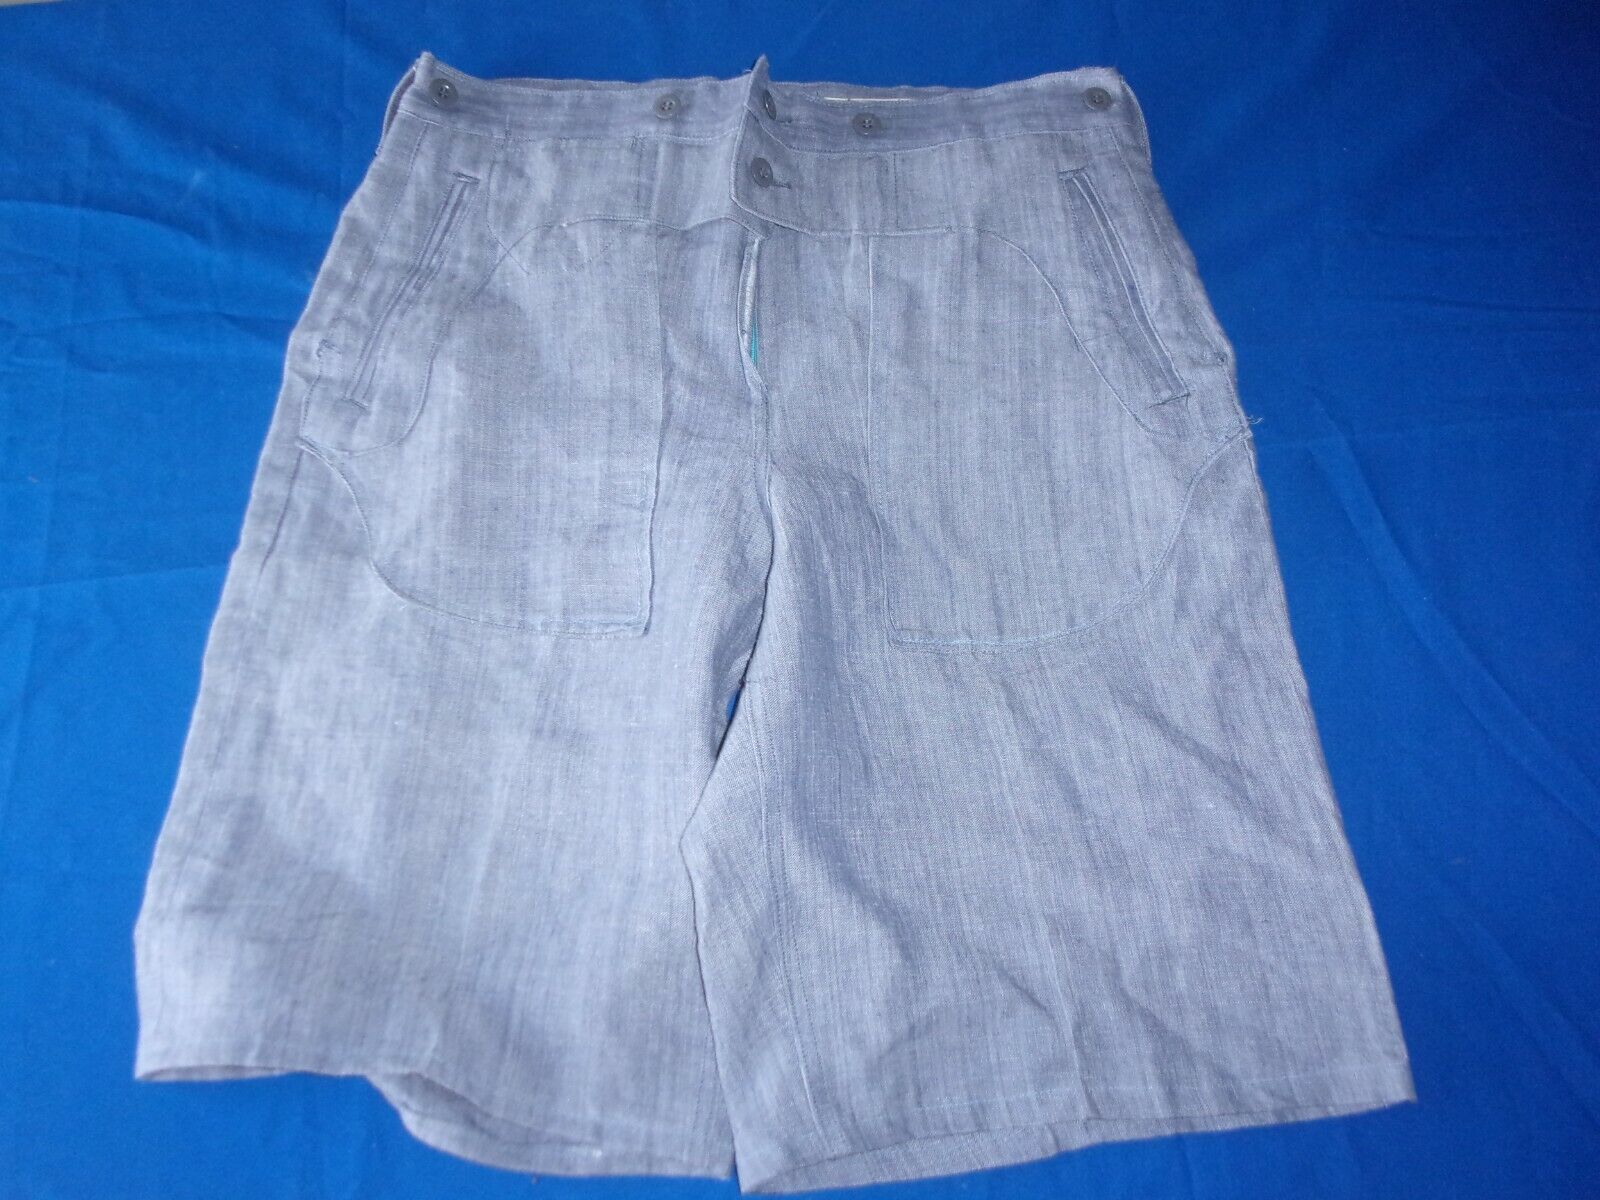 DATED MARCH 1961 VINTAGE FRENCH MILITARY NAVY NAVAL SAILOR BLUE SHORTS WAIST 34